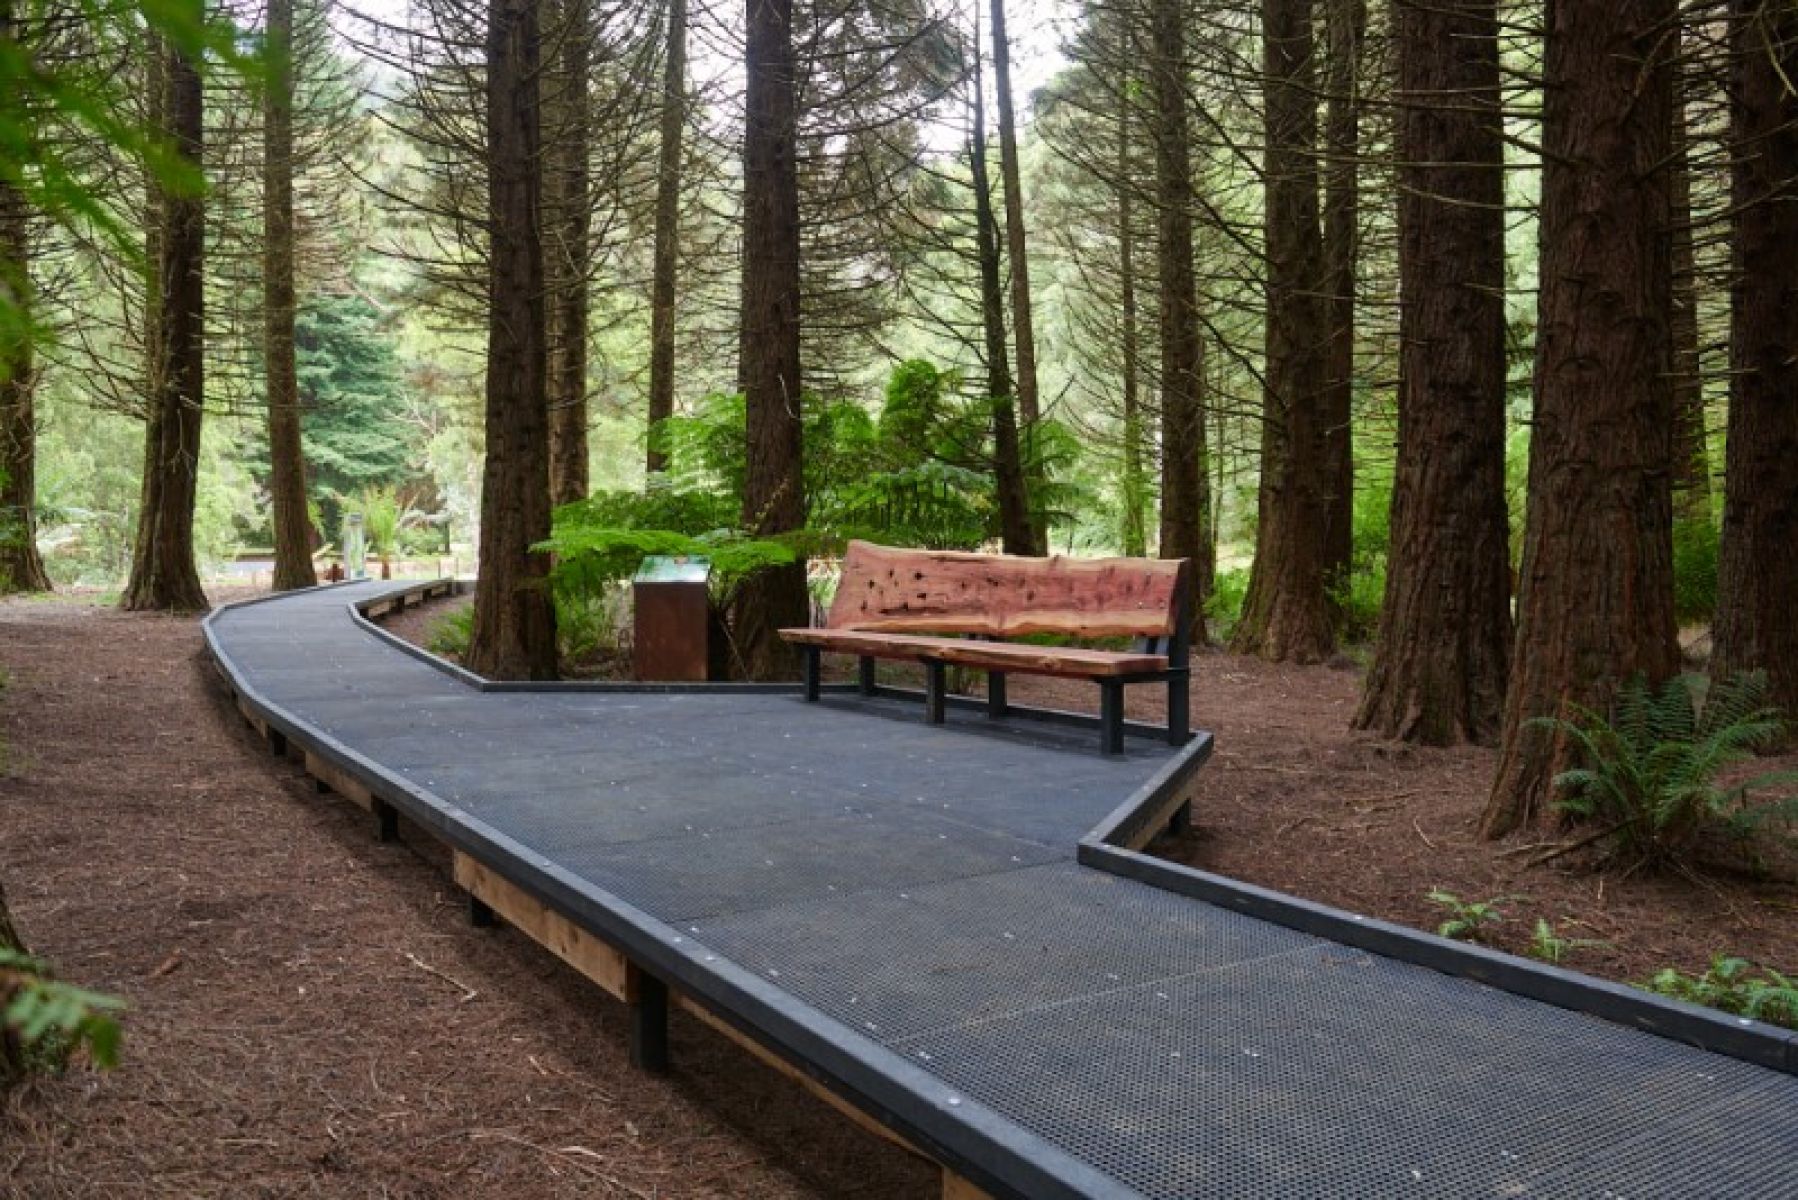 A wooden seat on a walkway under tall redwood trees.